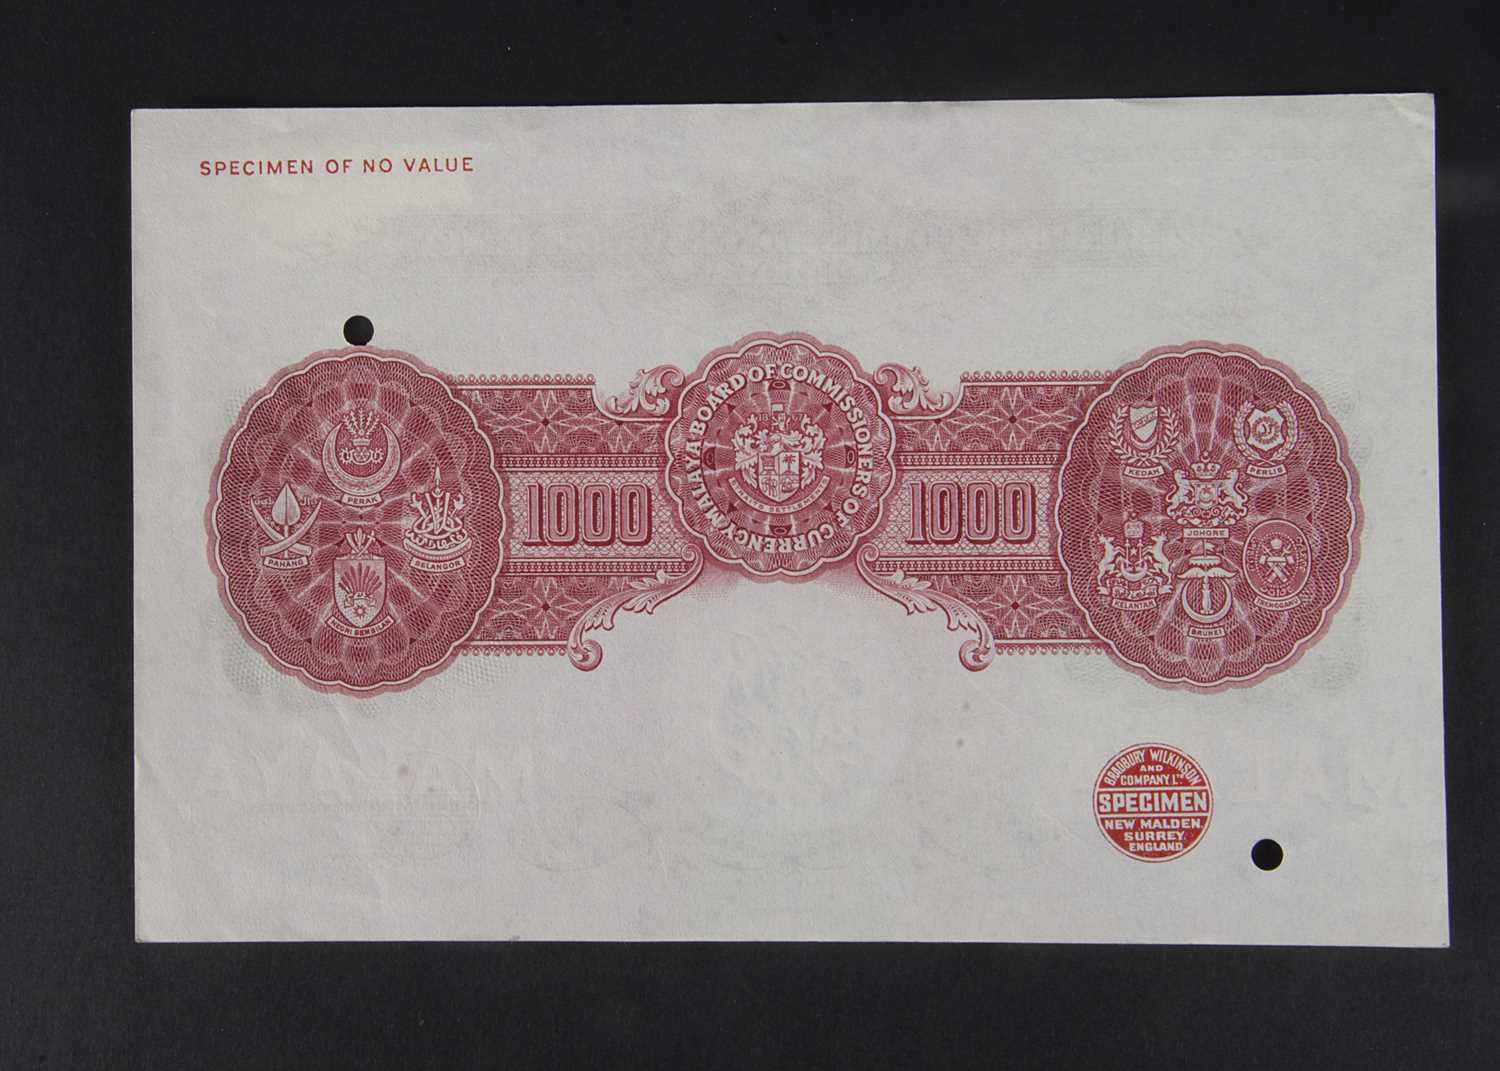 Specimen Bank Note: Board of Commissioners of Currency, Malaya specimen 1000 Dollars, - Image 2 of 2